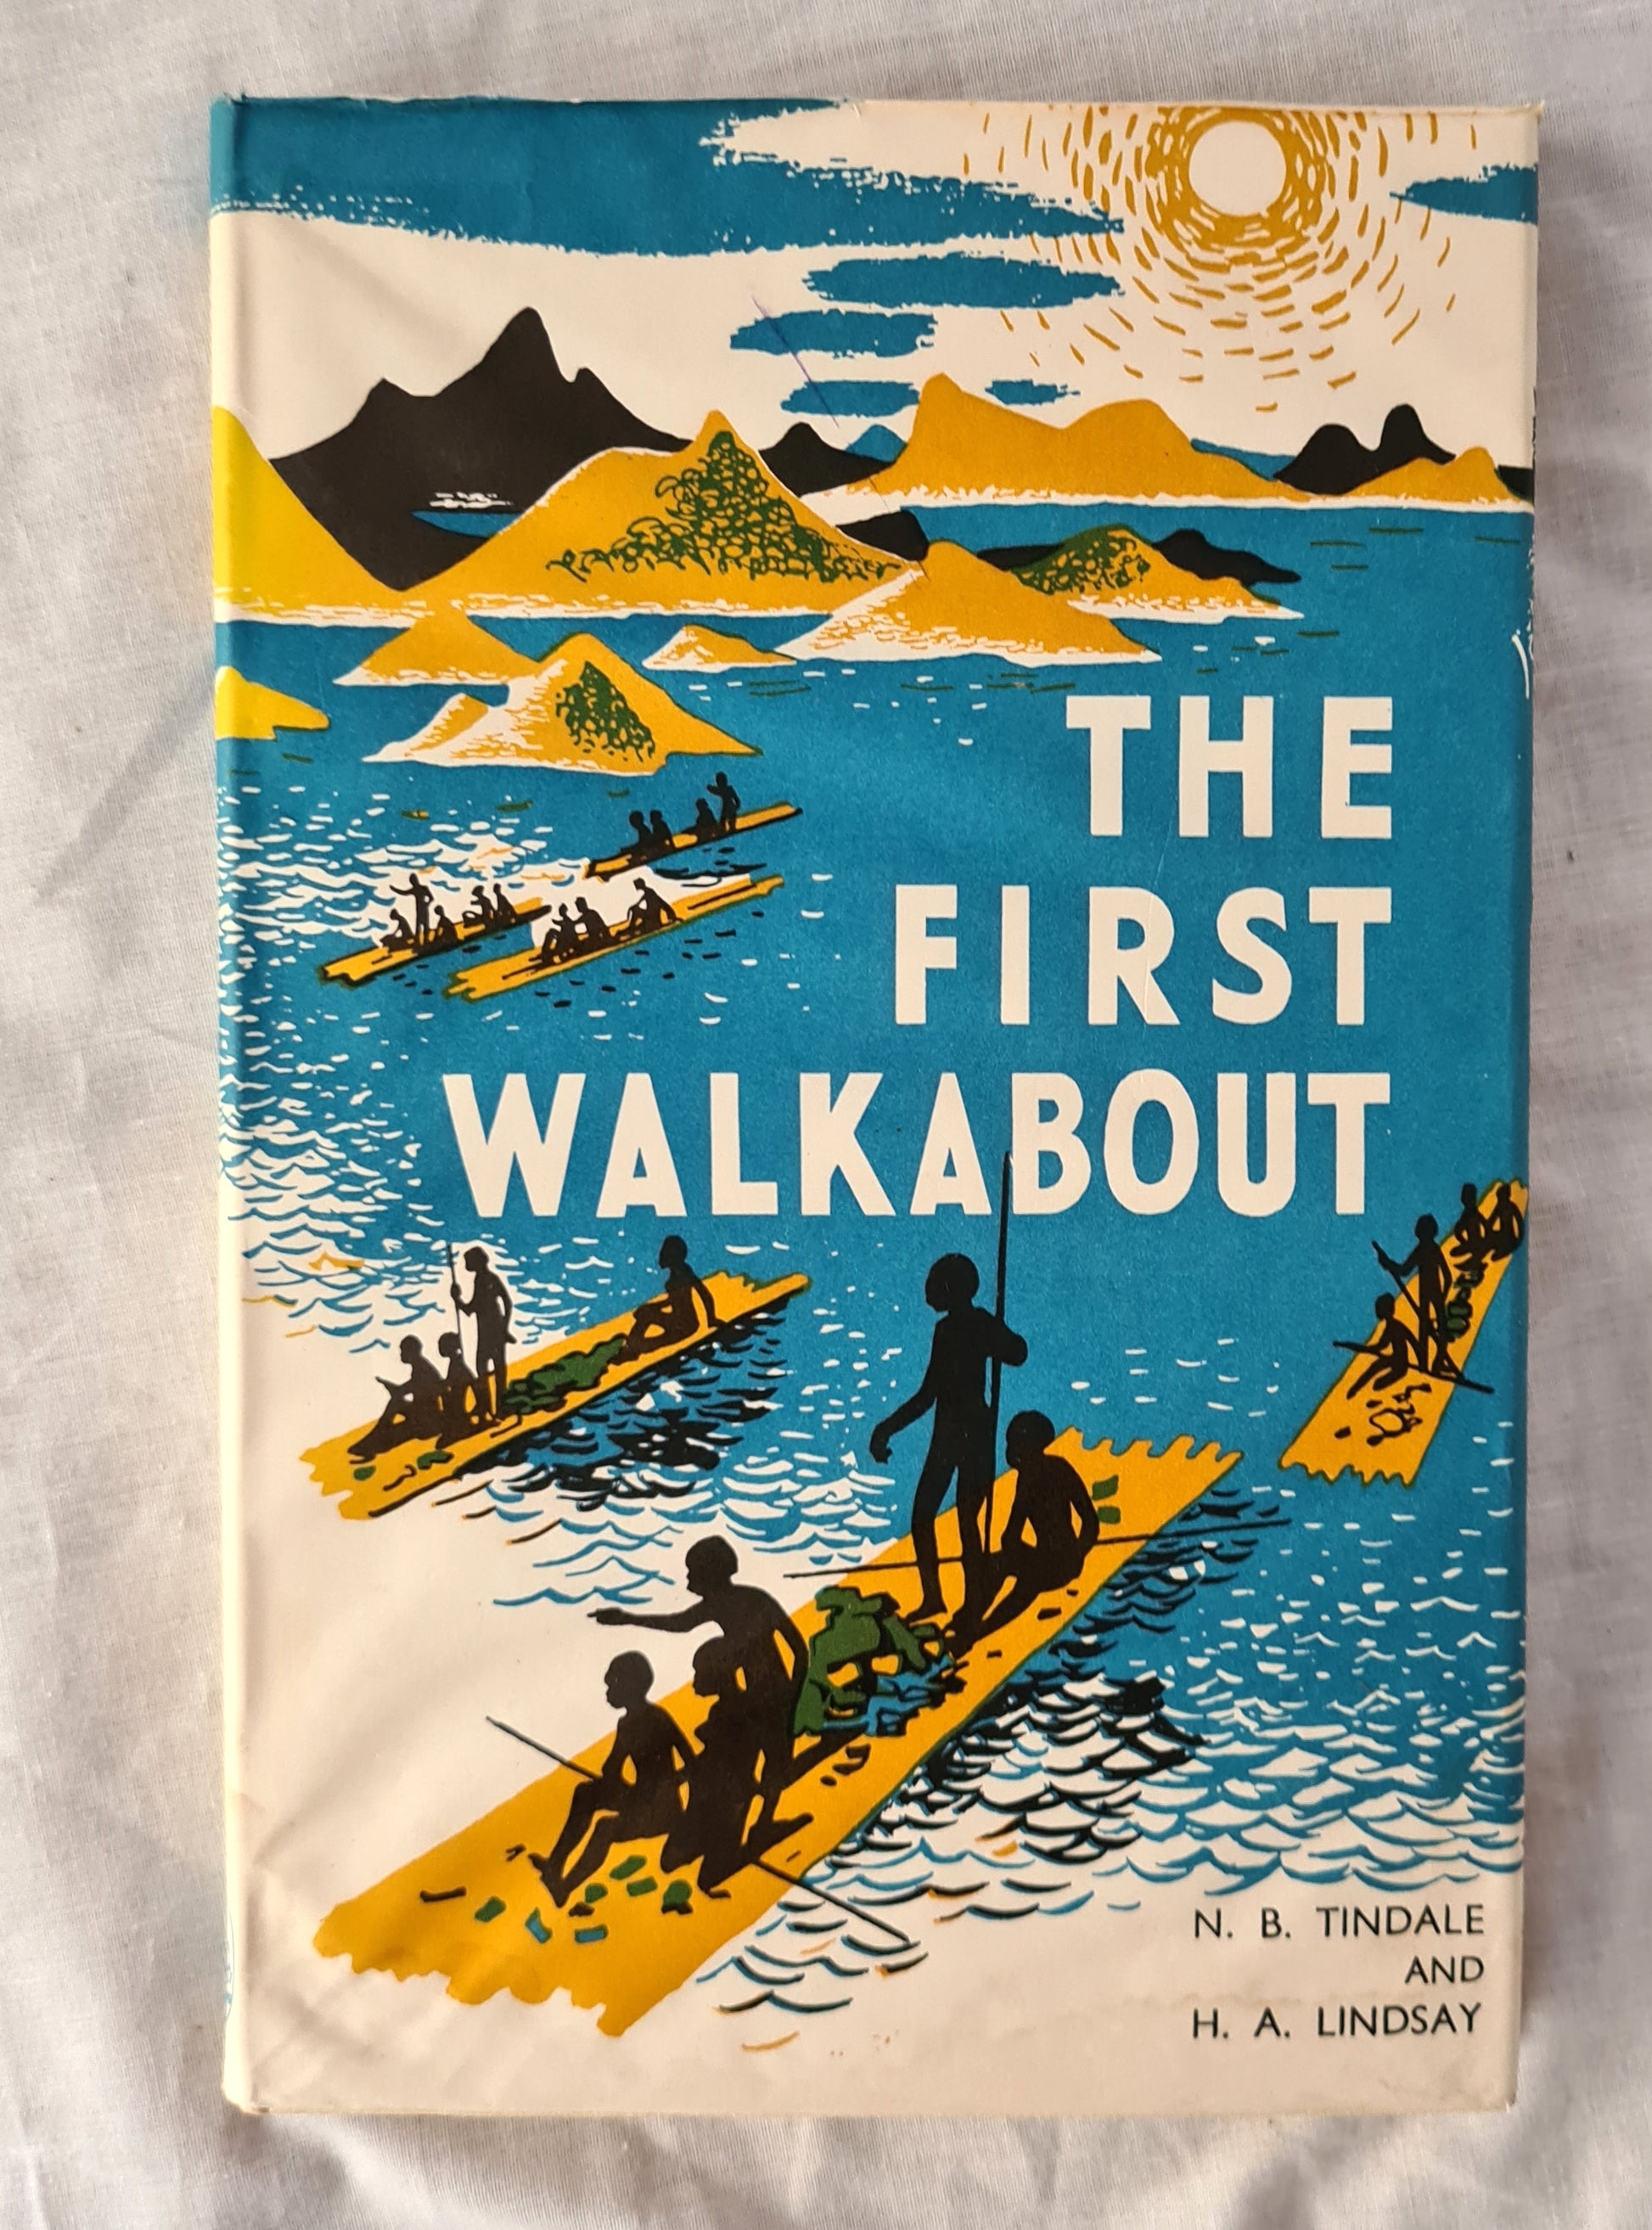 The First Walkabout  by Norman B. Tindale and H. A. Lindsay  Illustrated by Madeleine Boyce